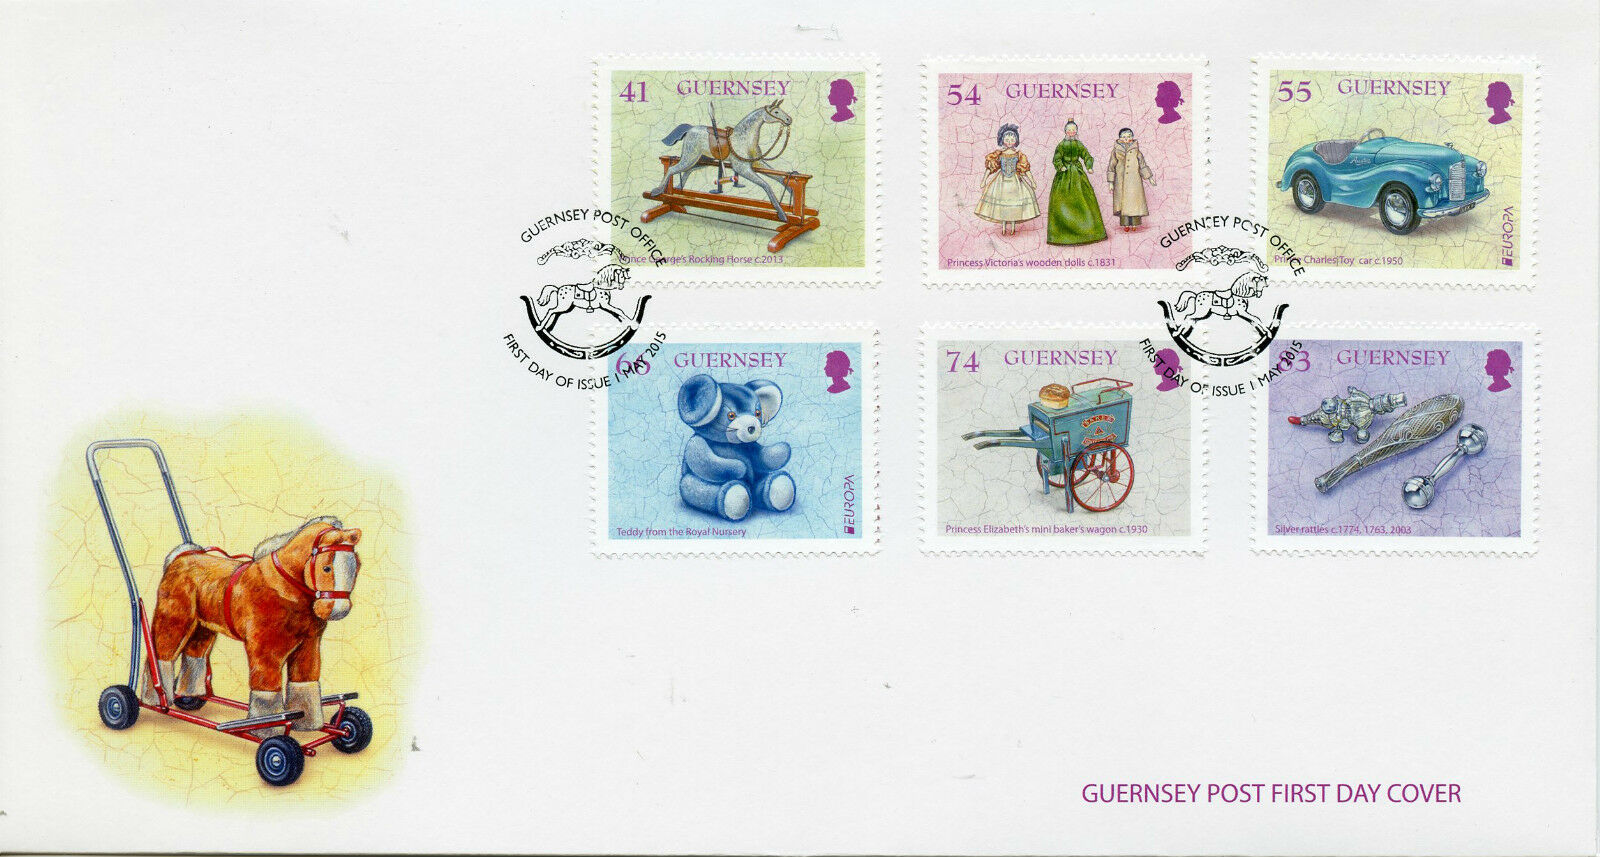 Guernsey 2015 FDC Old Toys Europa 6v Set Cover Royalty Cars Dolls Teddy